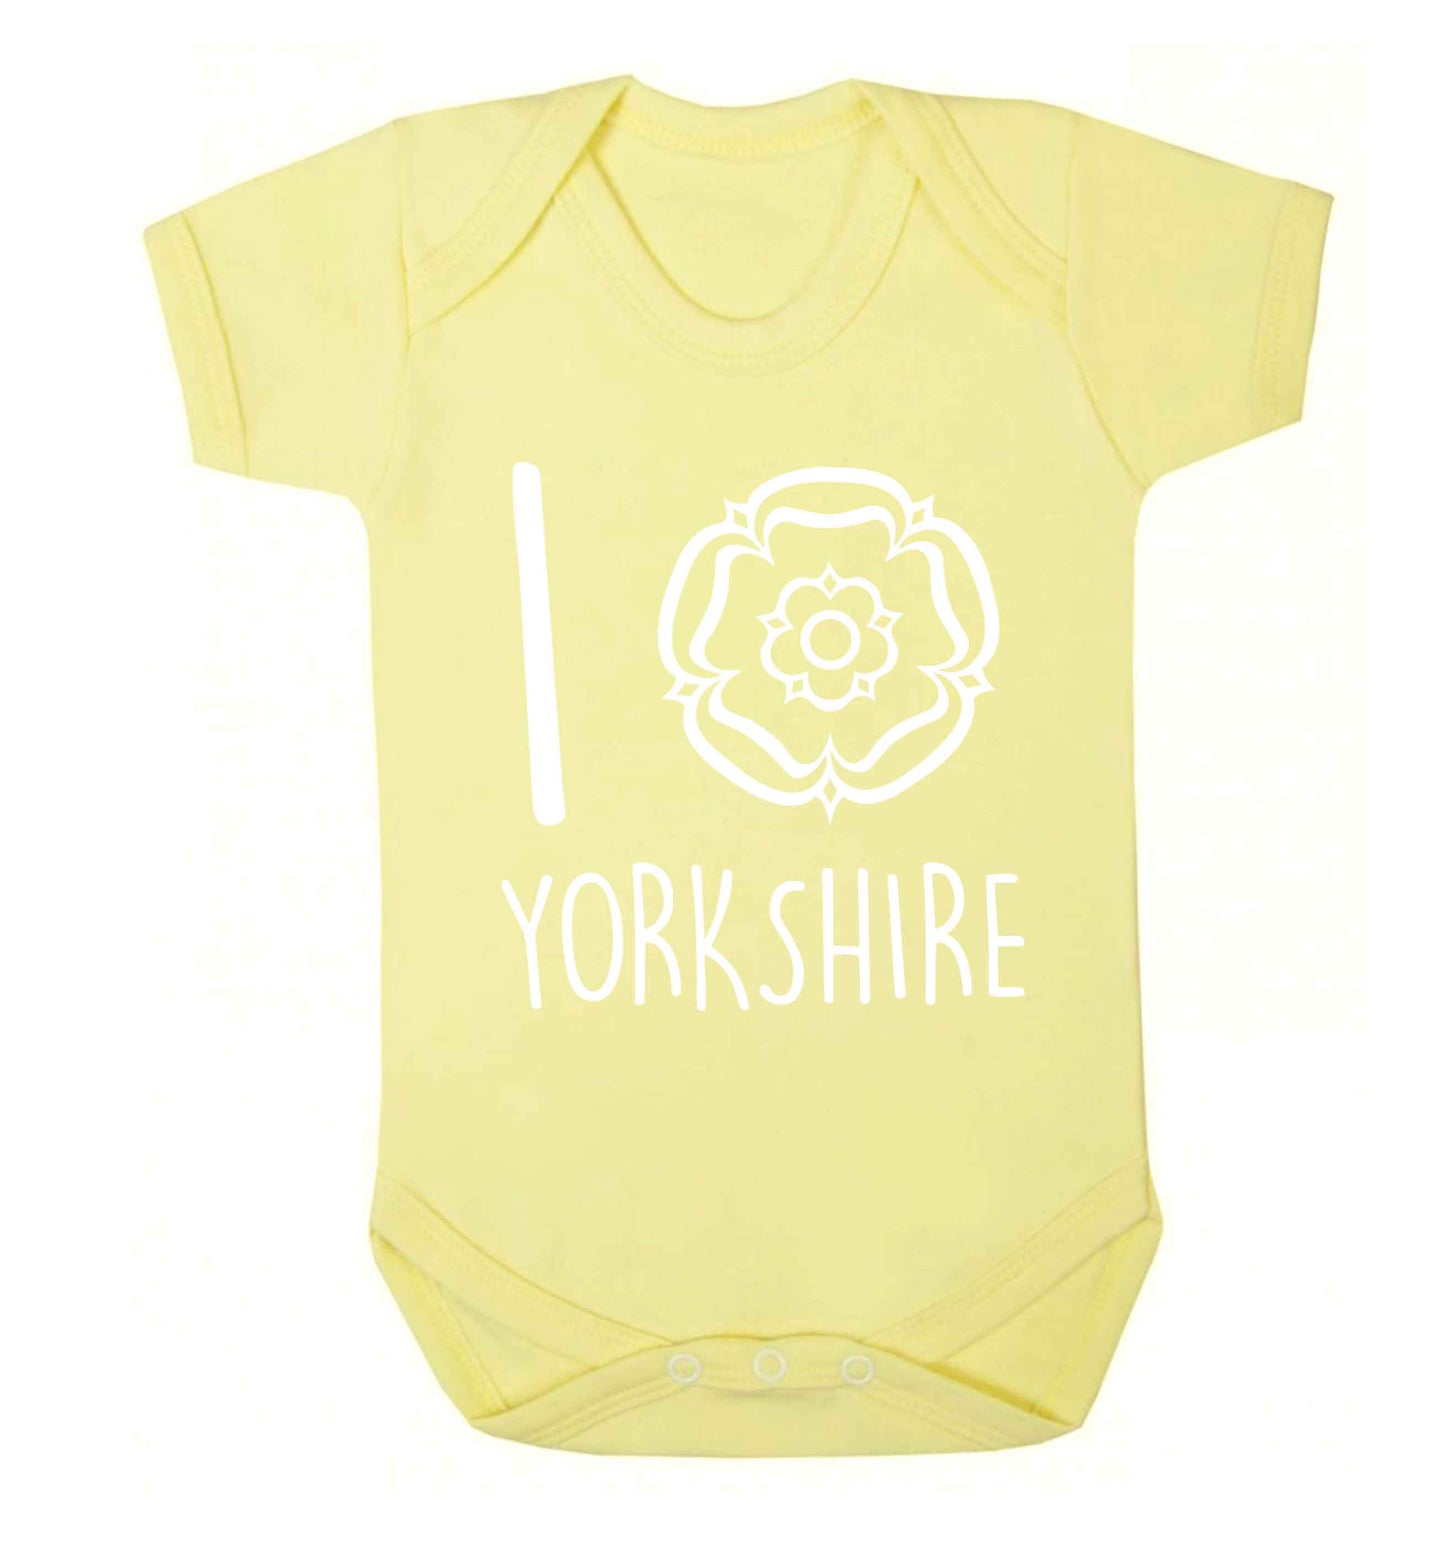 I love Yorkshire Baby Vest pale yellow 18-24 months